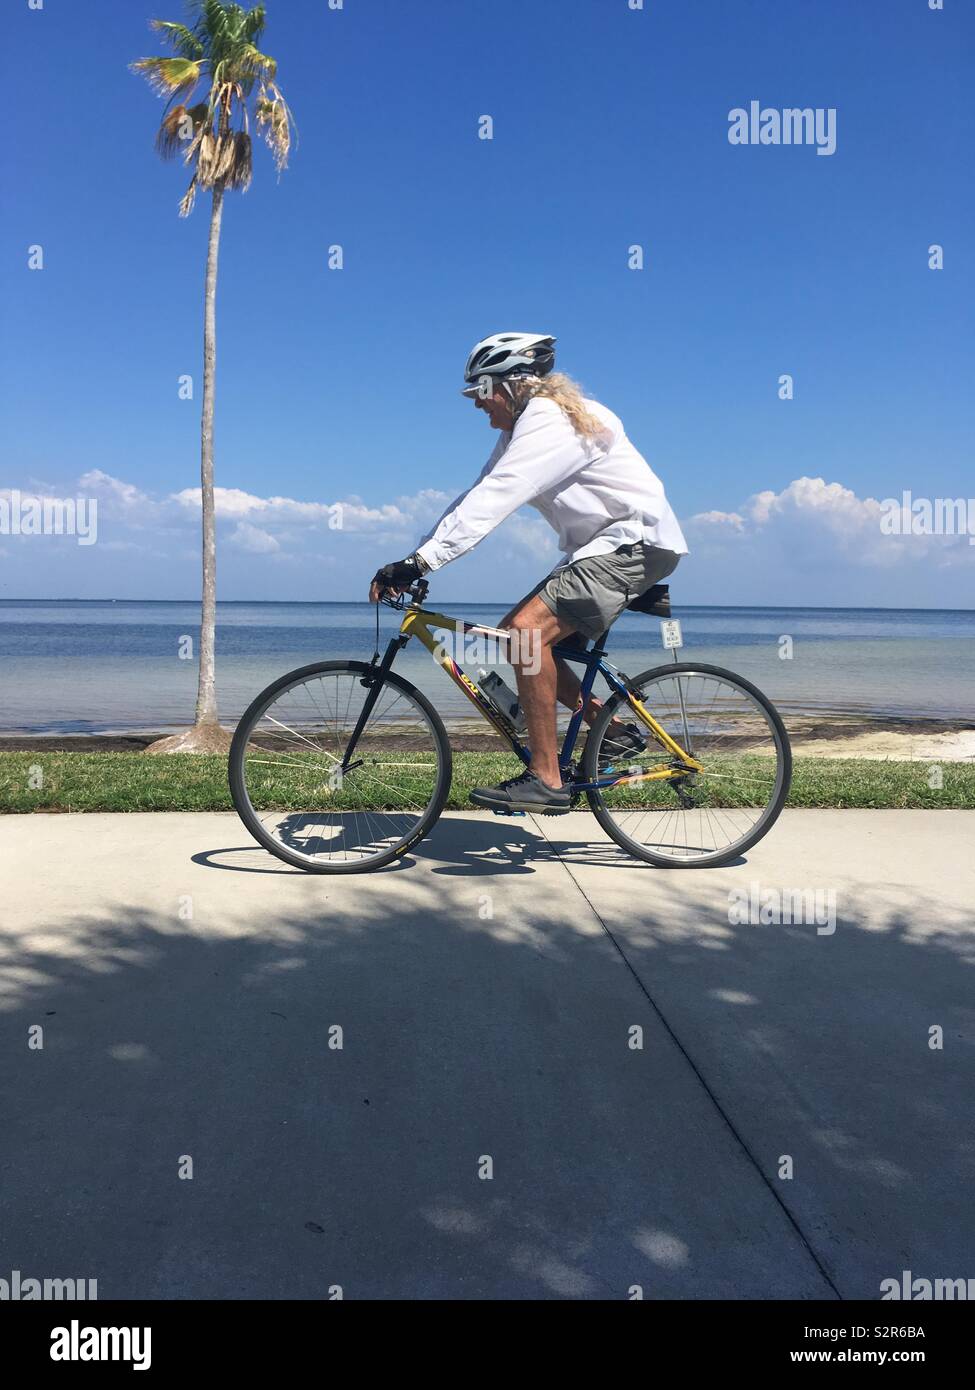 Man with long hair riding bike past a palm tree Stock Photo